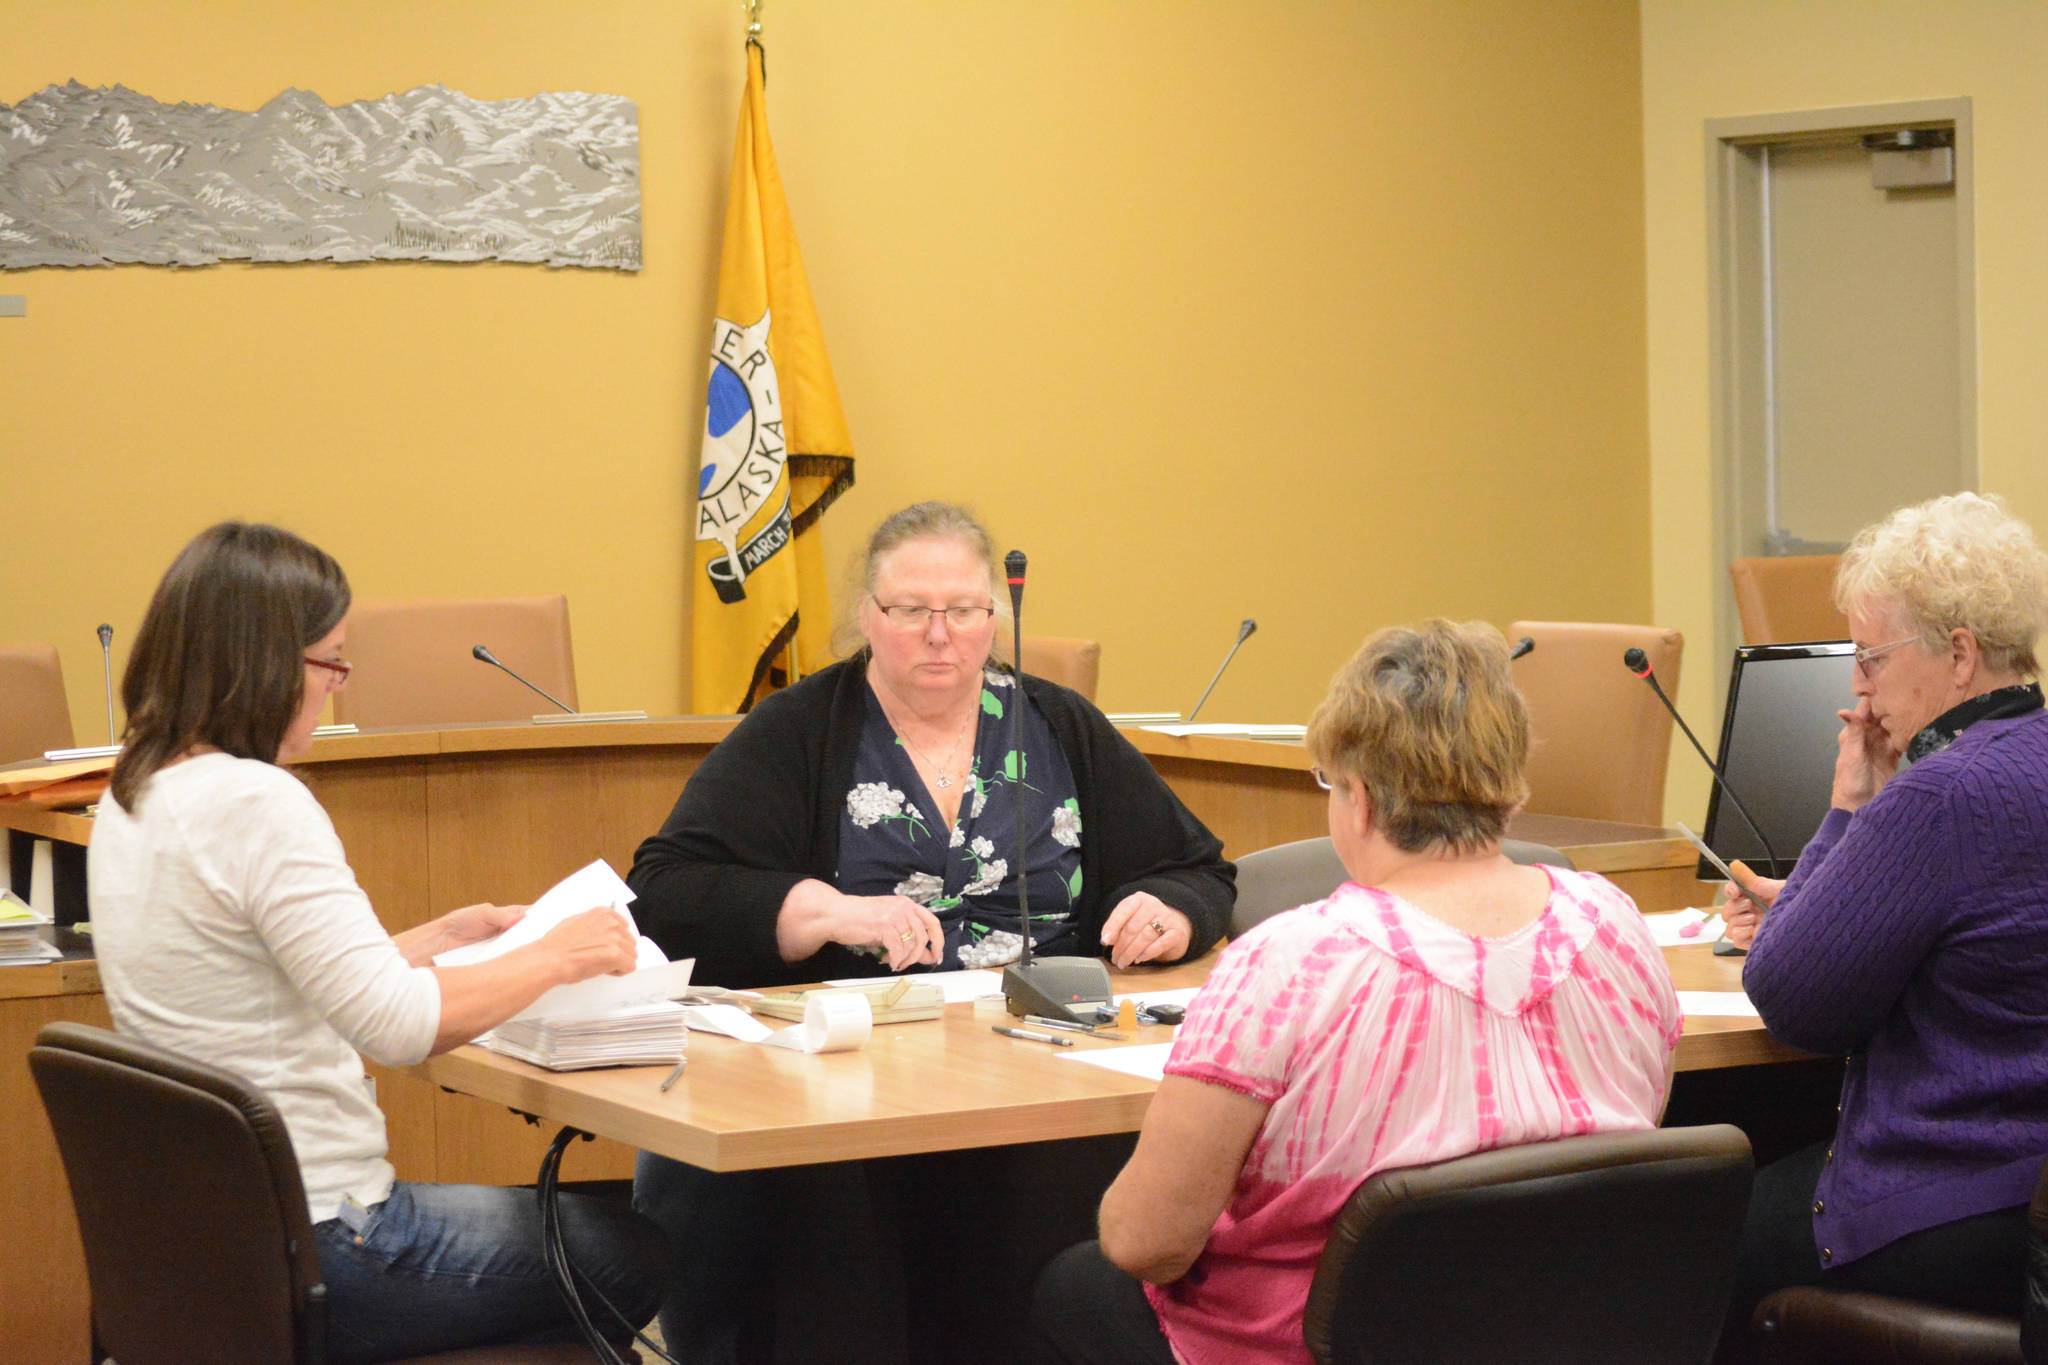 Members of the Homer Special Election Canvass Board to a hand count of the last batch of ballots on June 16, 2017, afternoon in the Cowles Council Chambers, Homer City Hall. From left to right are City Clerk Melissa Jacobsen, Deputy City Clerk Renee Krause, board member Terry Meyer and board member Maryann Lyda. The election to recall Homer City Council members Donna Aderhold, David Lewis and Catriona Reynolds failed, with the “no” votes winning by 57 percent for Aderhold and Lewis and 56 percent for Reynolds.